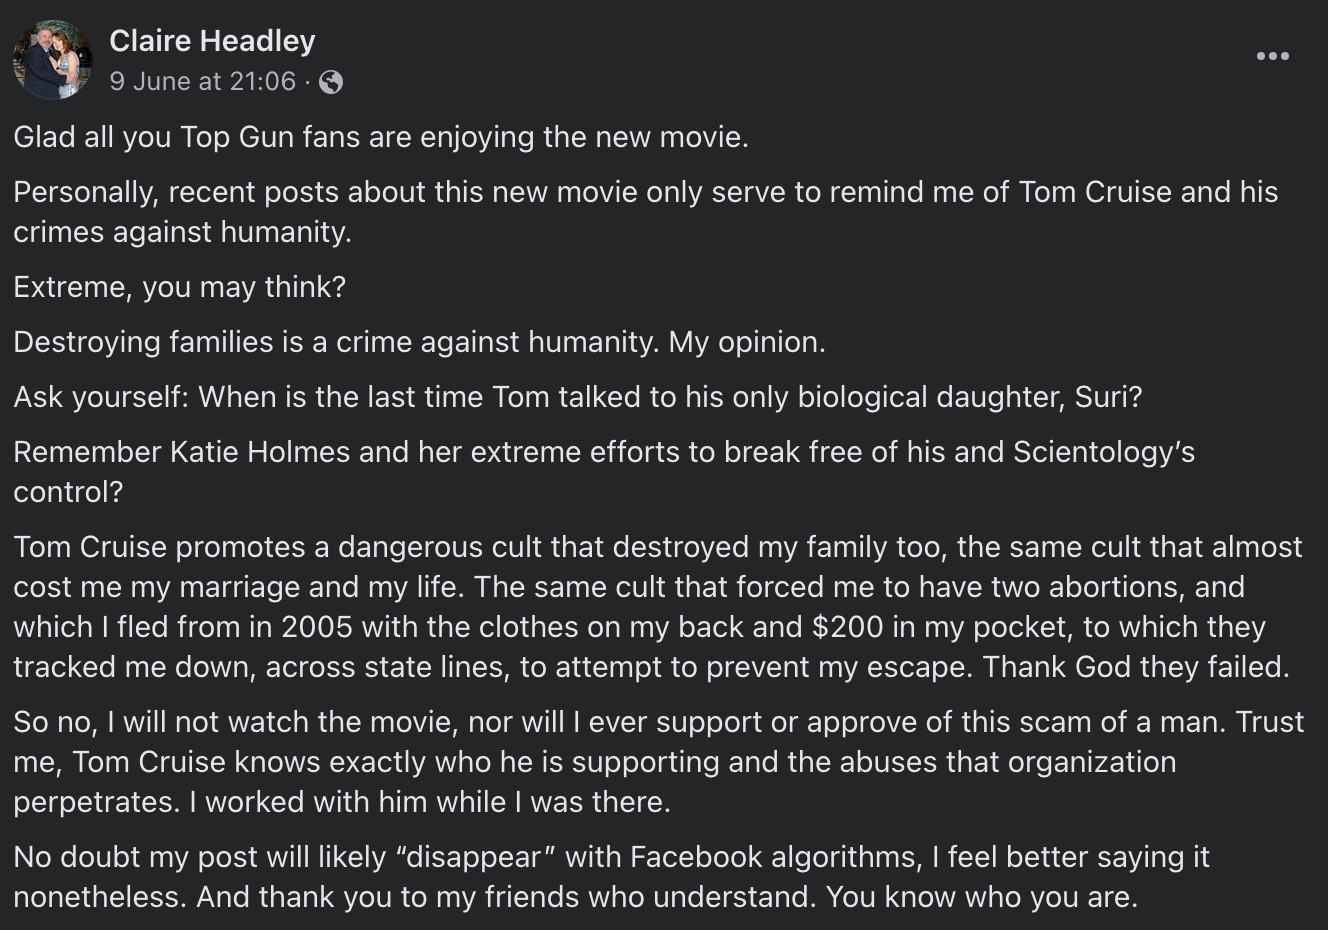 the FB post saying that Tom Cruise is part of an abusive cult